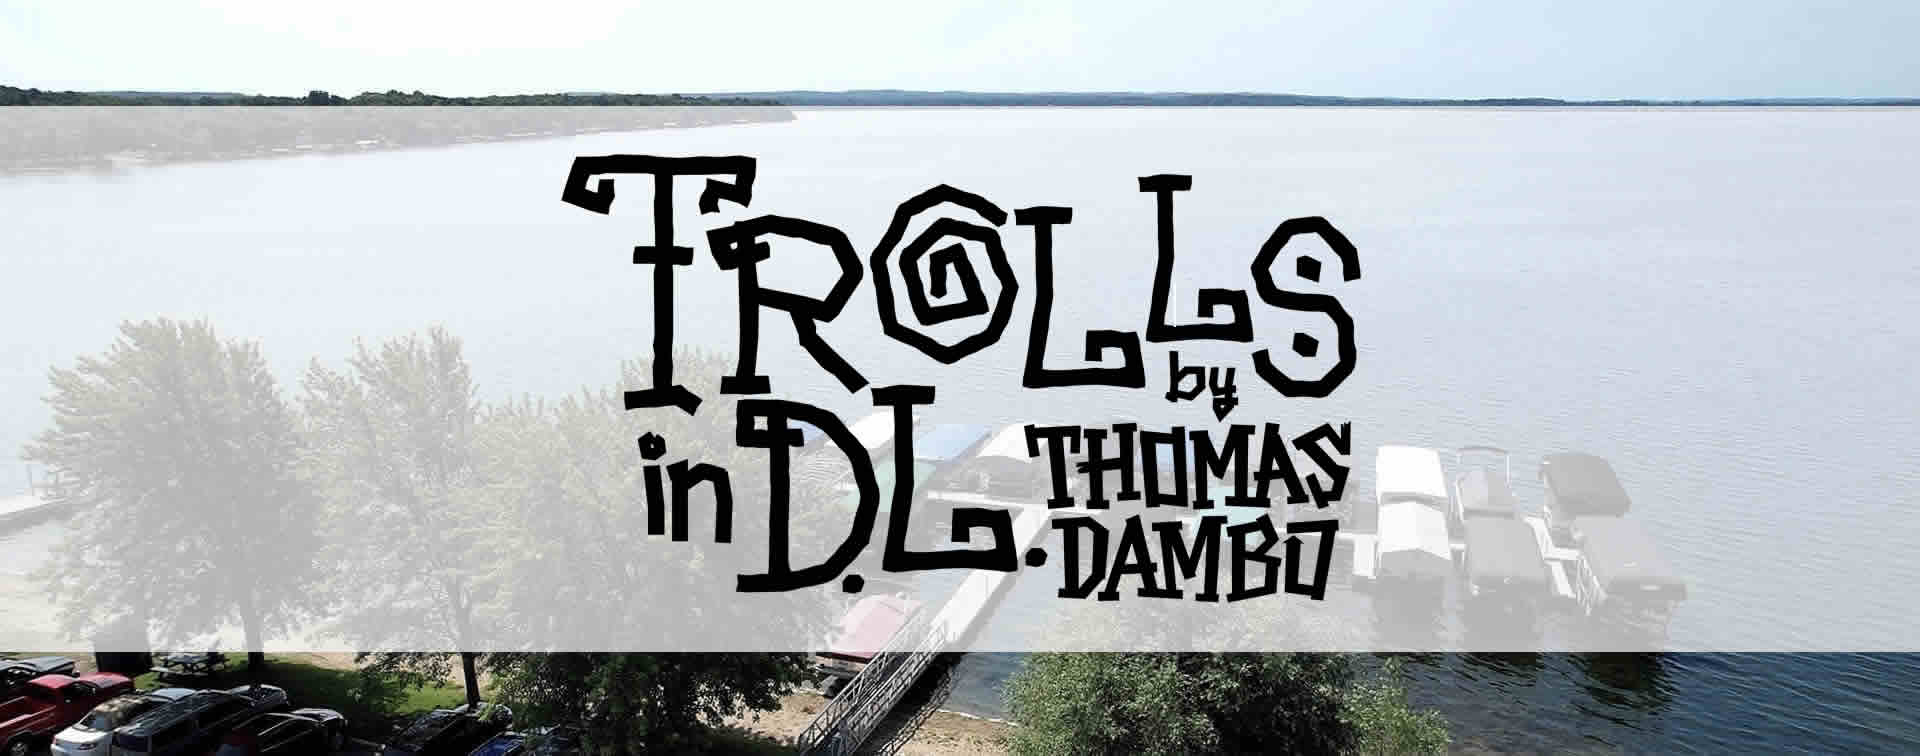 Trolls DL are coming soon.